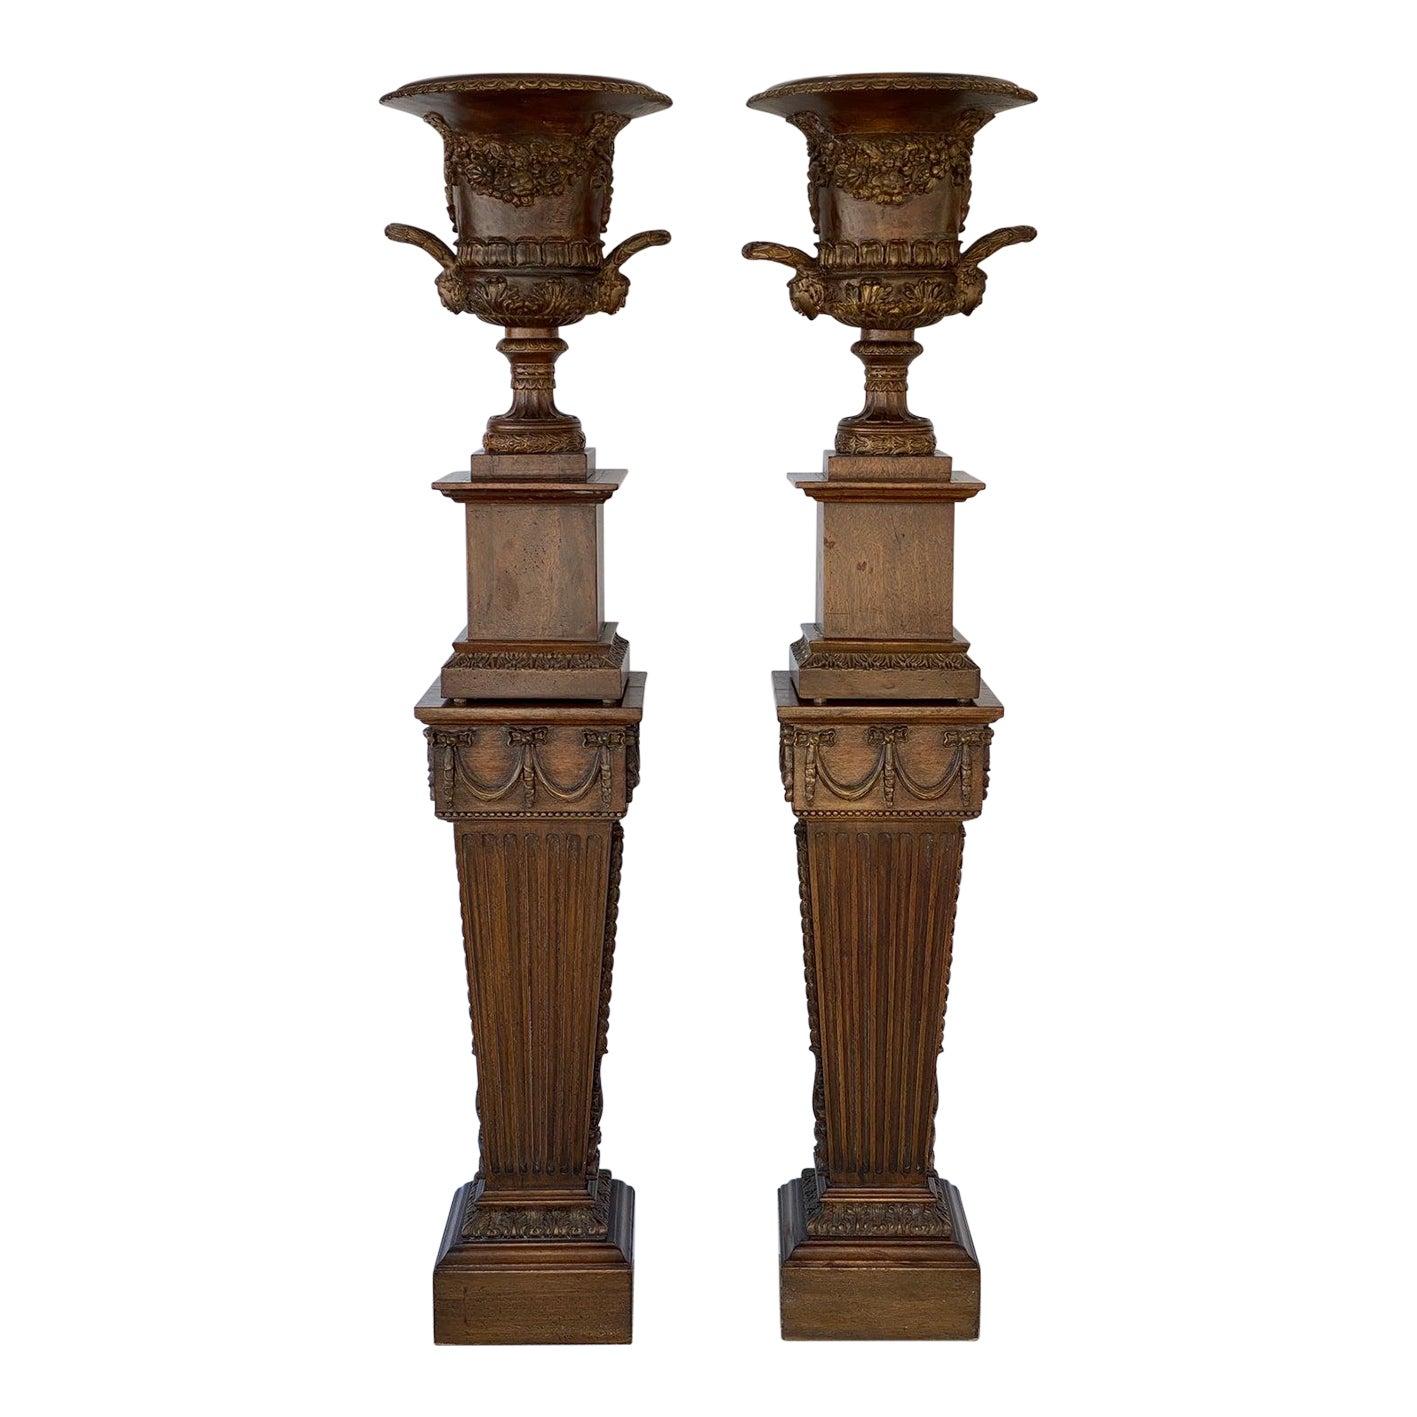 This stylish pair of hand-carved wood campara urns on stands date to the 1930s and were acquired from a home decorated by the iconic interior designer and antiuqe dealer John Regas.

Note: The overall dimensions are 71